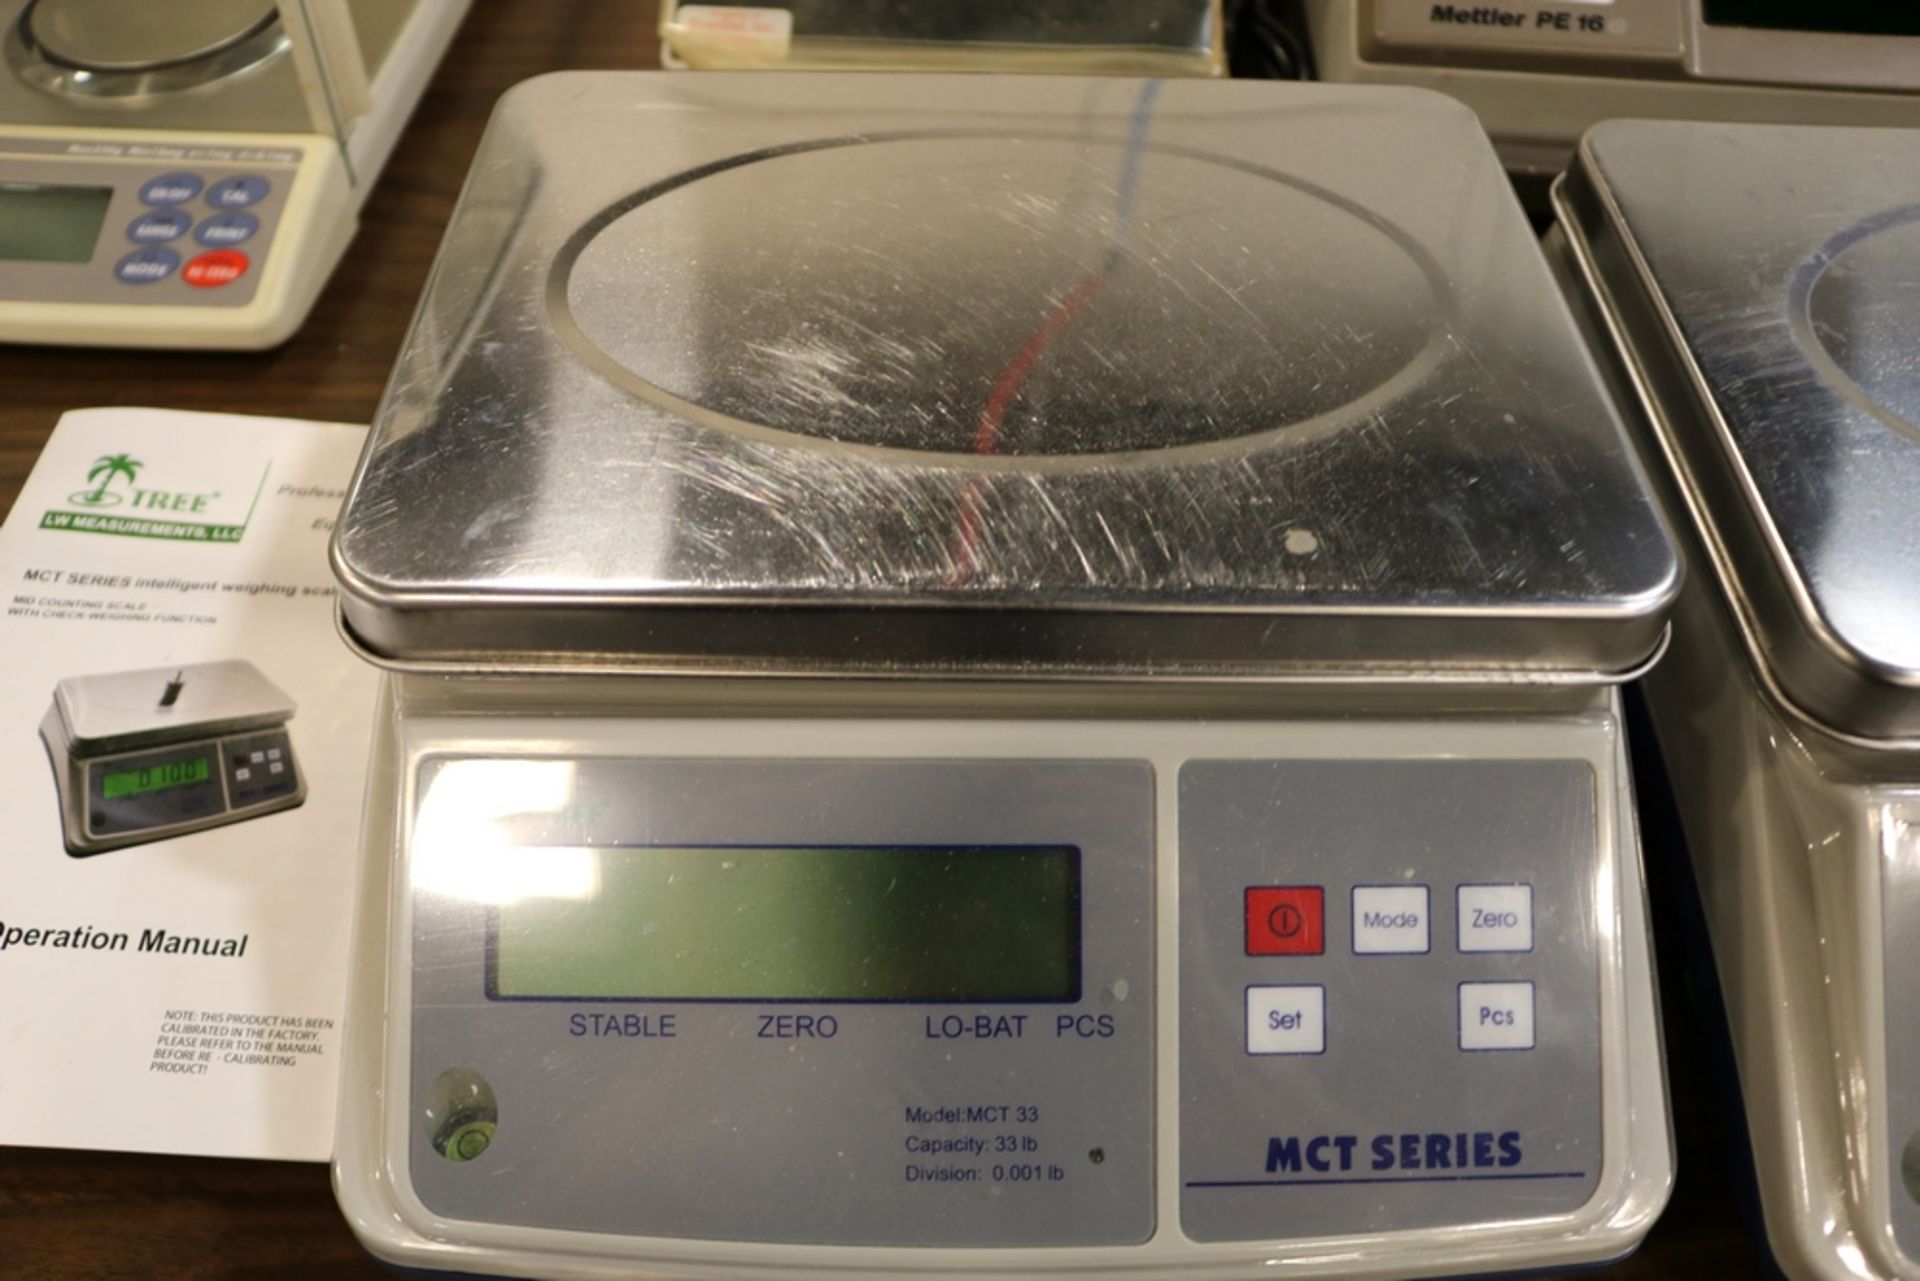 (2) Tree MCT 22 Series Intelligent Weighing Scale 33 lb Capacity Mid COunting Scale - Image 5 of 7